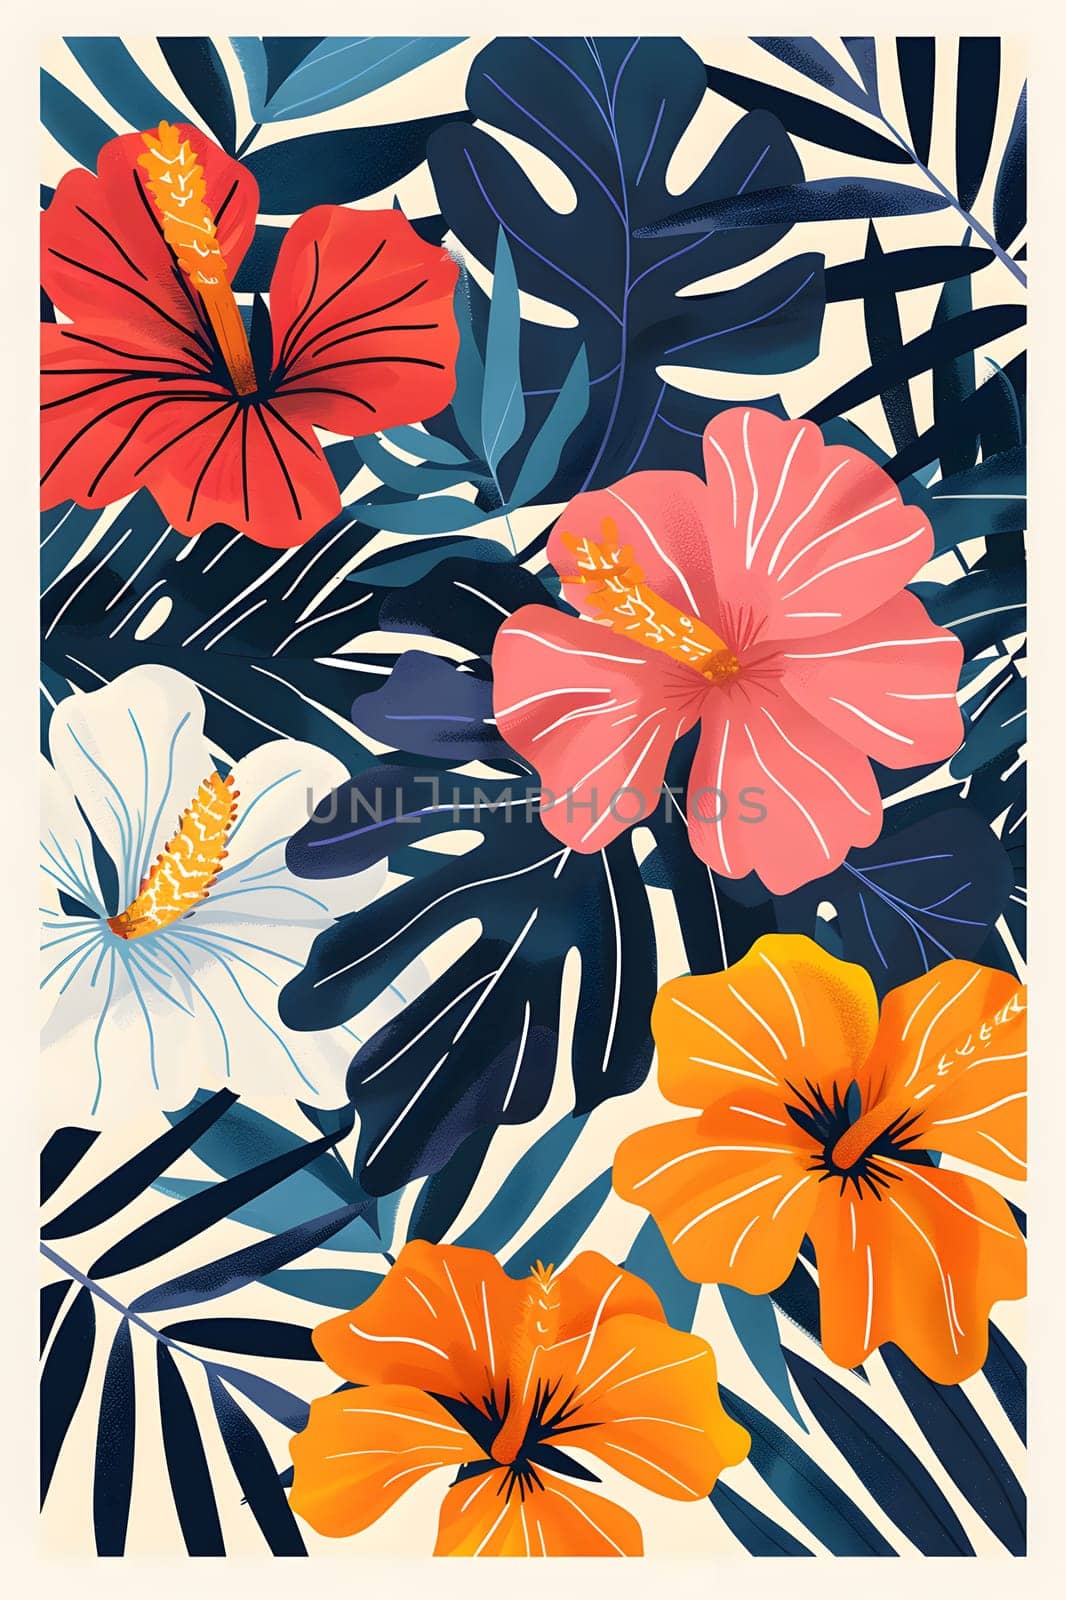 Creative arts meet botany in this vibrant poster featuring tropical flowers and plant leaves. The orange petals pop against the white rectangle background, making it a beautiful piece of textile art